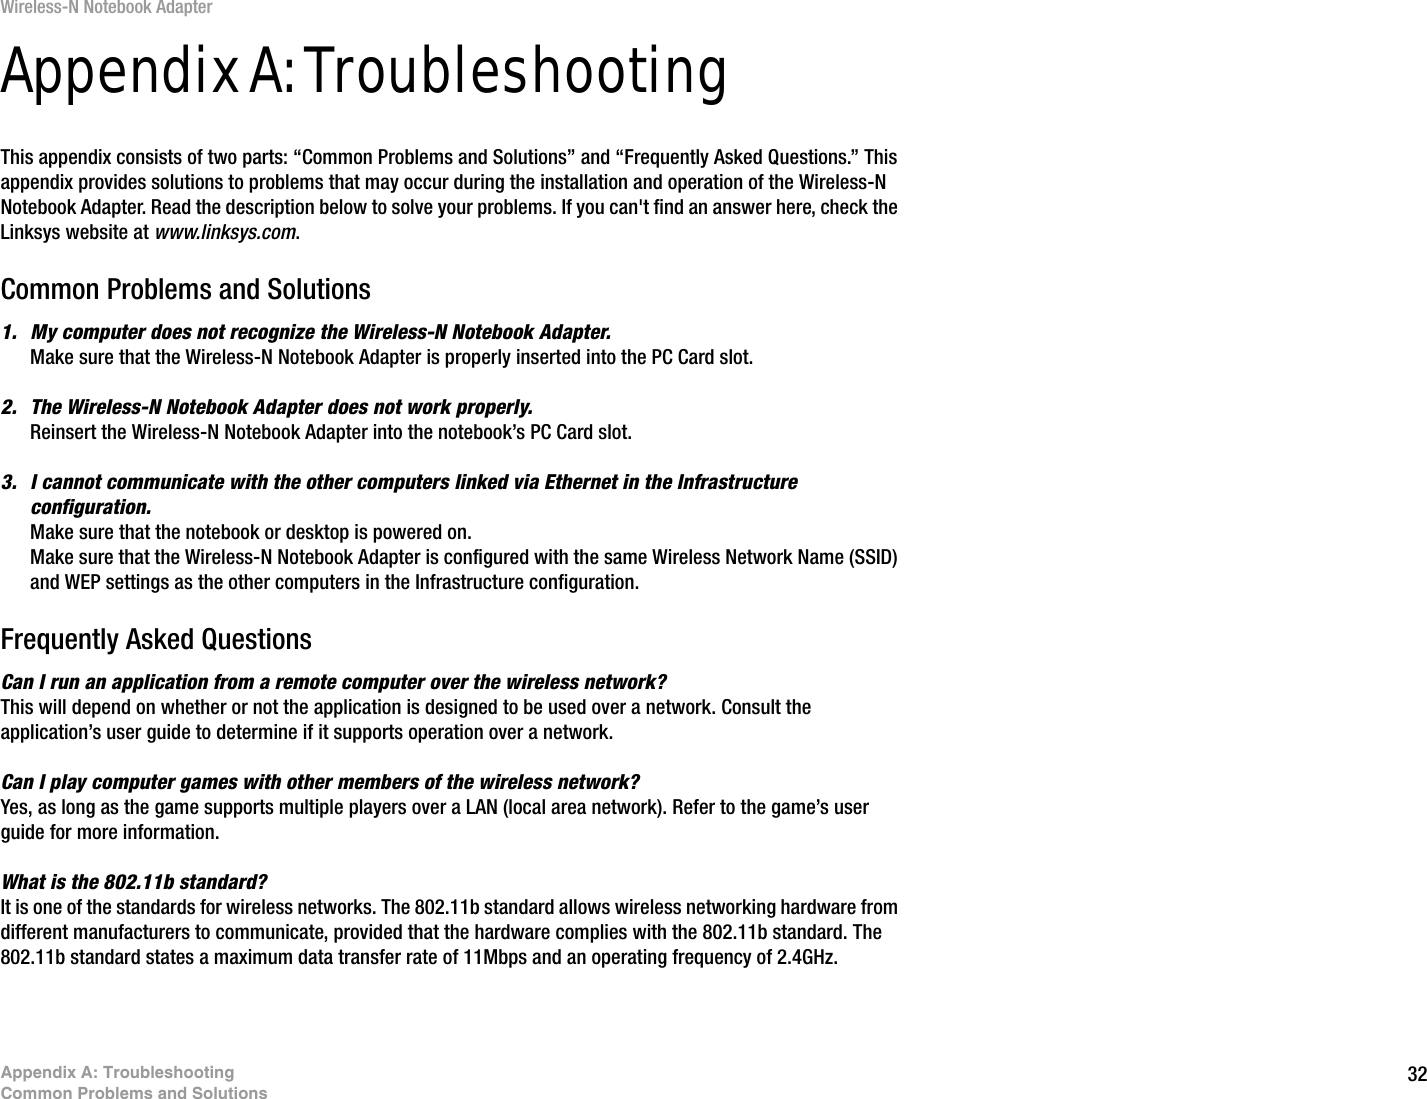 32Appendix A: TroubleshootingCommon Problems and SolutionsWireless-N Notebook AdapterAppendix A: TroubleshootingThis appendix consists of two parts: “Common Problems and Solutions” and “Frequently Asked Questions.” This appendix provides solutions to problems that may occur during the installation and operation of the Wireless-N Notebook Adapter. Read the description below to solve your problems. If you can&apos;t find an answer here, check the Linksys website at www.linksys.com.Common Problems and Solutions1. My computer does not recognize the Wireless-N Notebook Adapter.Make sure that the Wireless-N Notebook Adapter is properly inserted into the PC Card slot.2. The Wireless-N Notebook Adapter does not work properly.Reinsert the Wireless-N Notebook Adapter into the notebook’s PC Card slot.3. I cannot communicate with the other computers linked via Ethernet in the Infrastructure configuration.Make sure that the notebook or desktop is powered on.Make sure that the Wireless-N Notebook Adapter is configured with the same Wireless Network Name (SSID) and WEP settings as the other computers in the Infrastructure configuration.Frequently Asked QuestionsCan I run an application from a remote computer over the wireless network?This will depend on whether or not the application is designed to be used over a network. Consult the application’s user guide to determine if it supports operation over a network.Can I play computer games with other members of the wireless network?Yes, as long as the game supports multiple players over a LAN (local area network). Refer to the game’s user guide for more information.What is the 802.11b standard?It is one of the standards for wireless networks. The 802.11b standard allows wireless networking hardware from different manufacturers to communicate, provided that the hardware complies with the 802.11b standard. The 802.11b standard states a maximum data transfer rate of 11Mbps and an operating frequency of 2.4GHz. 